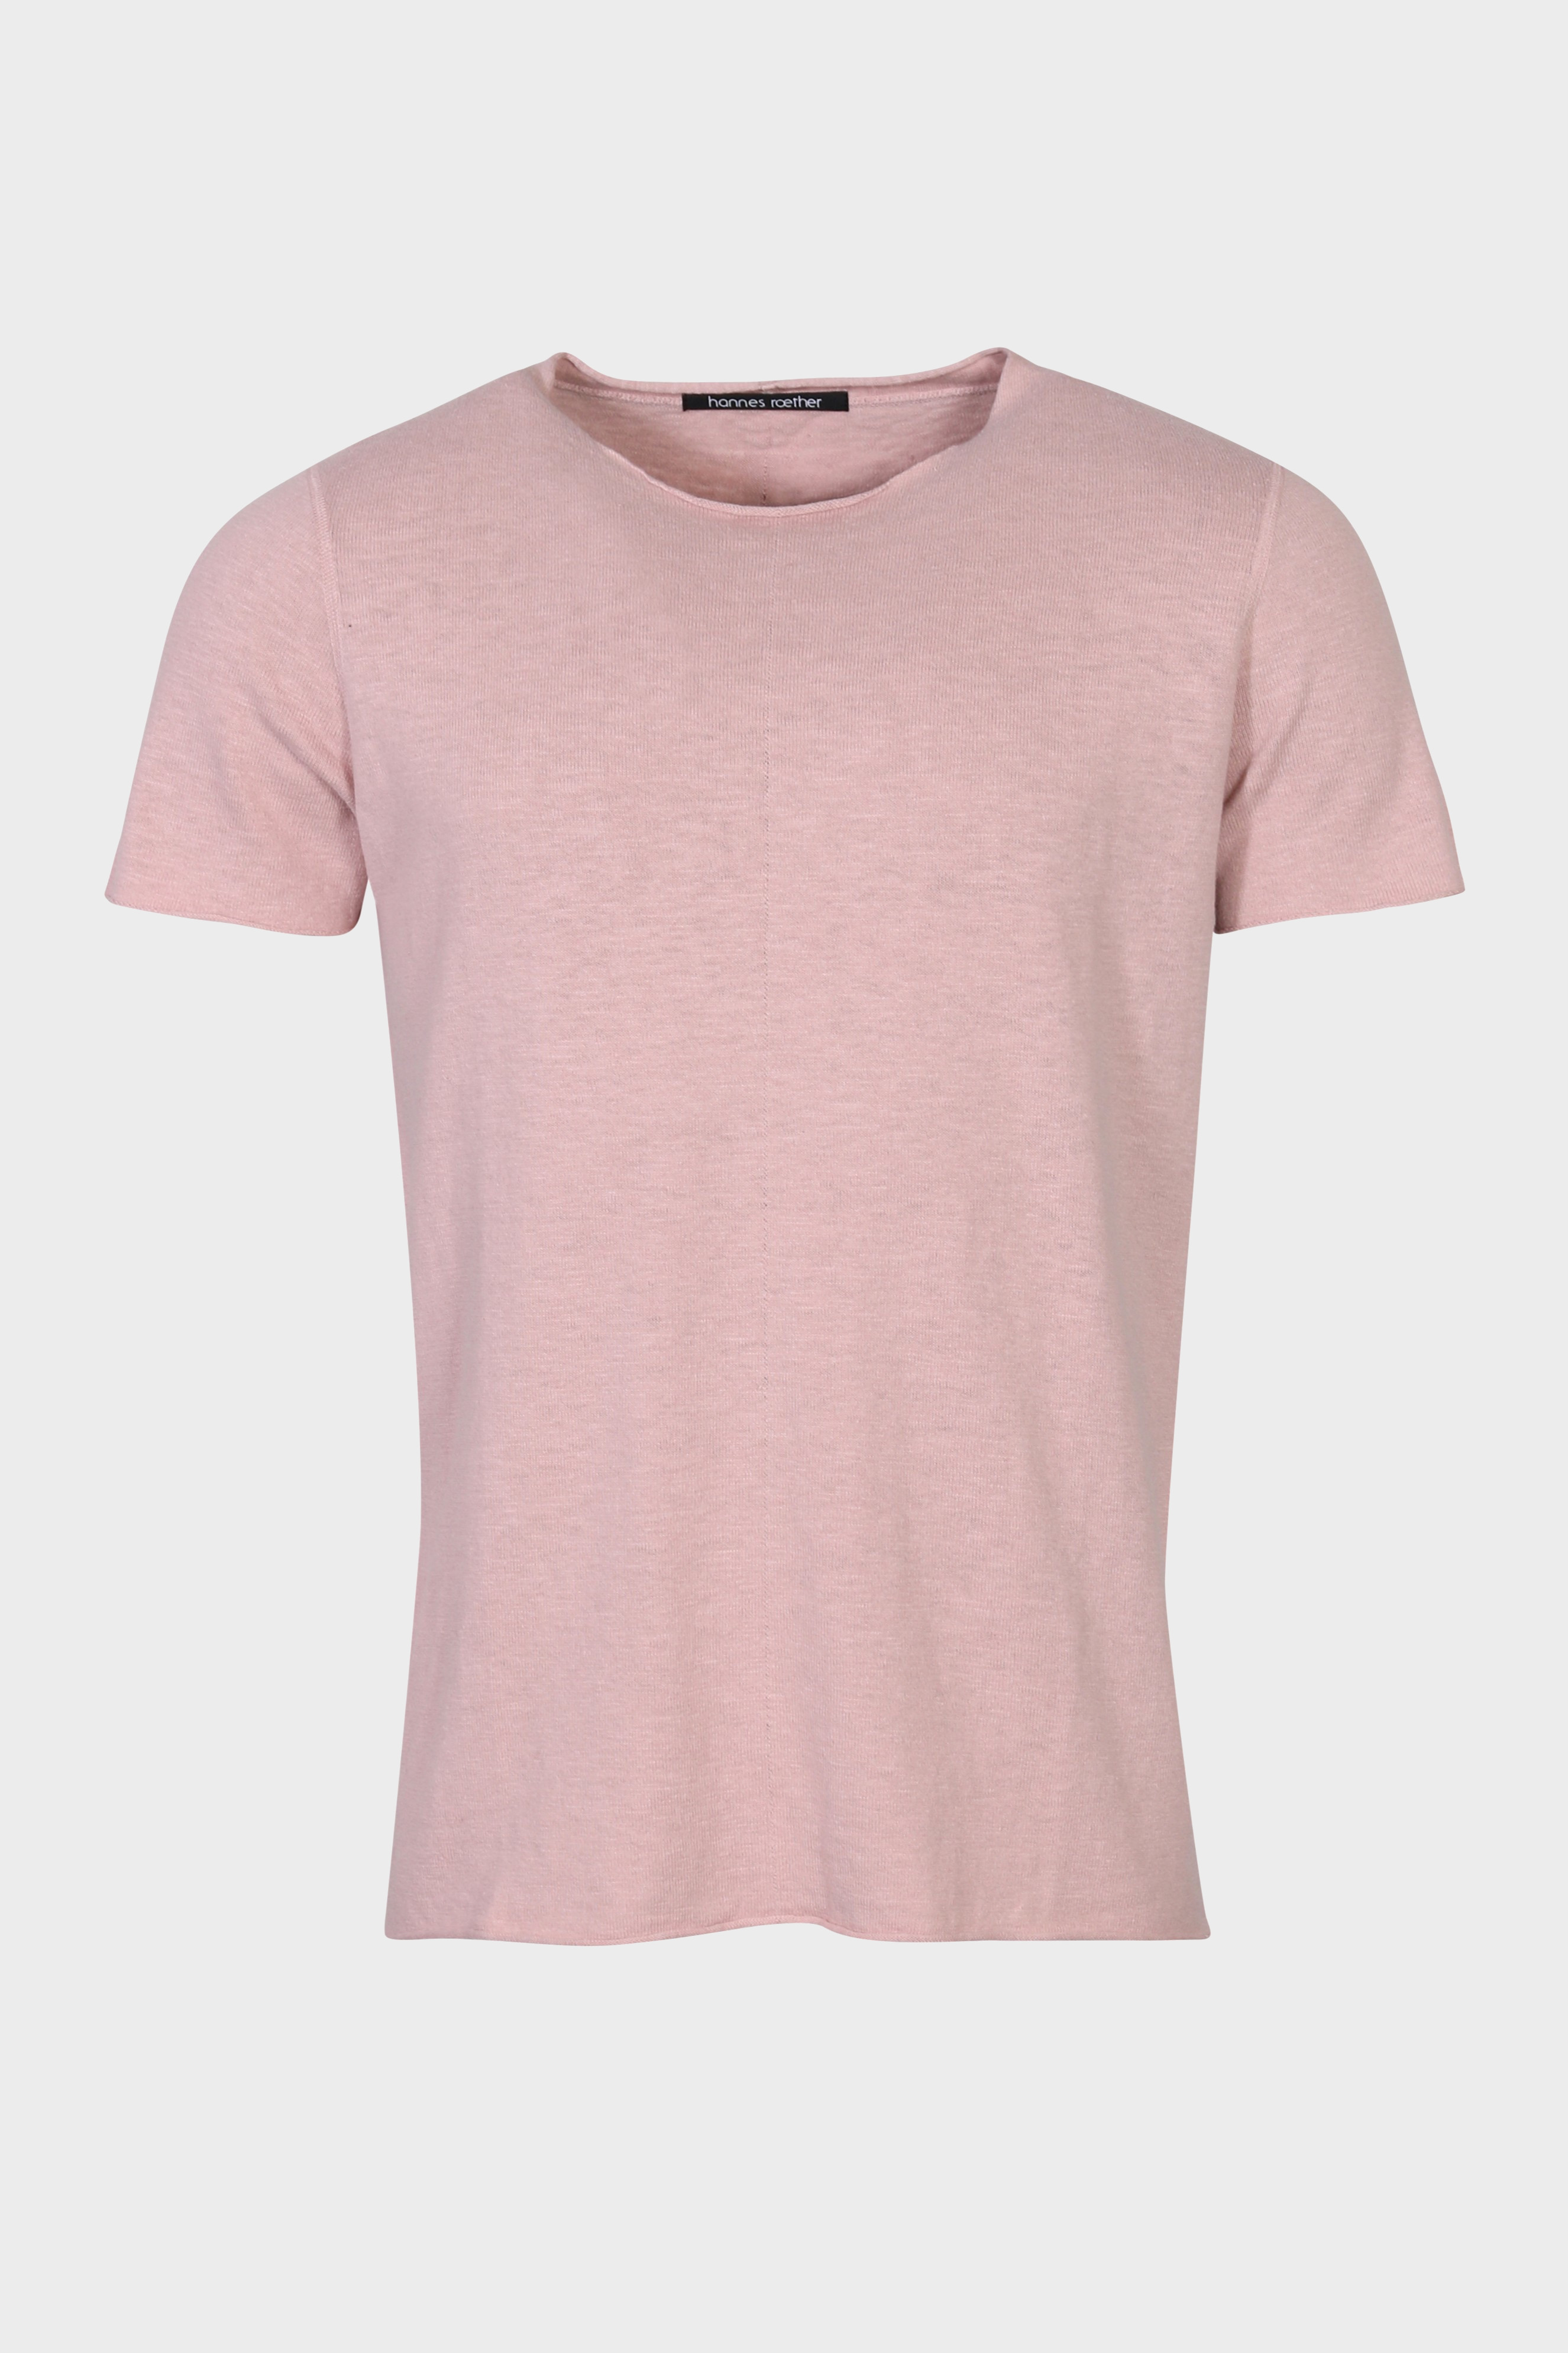 HANNES ROETHER Knit T-Shirt in Light Pink M